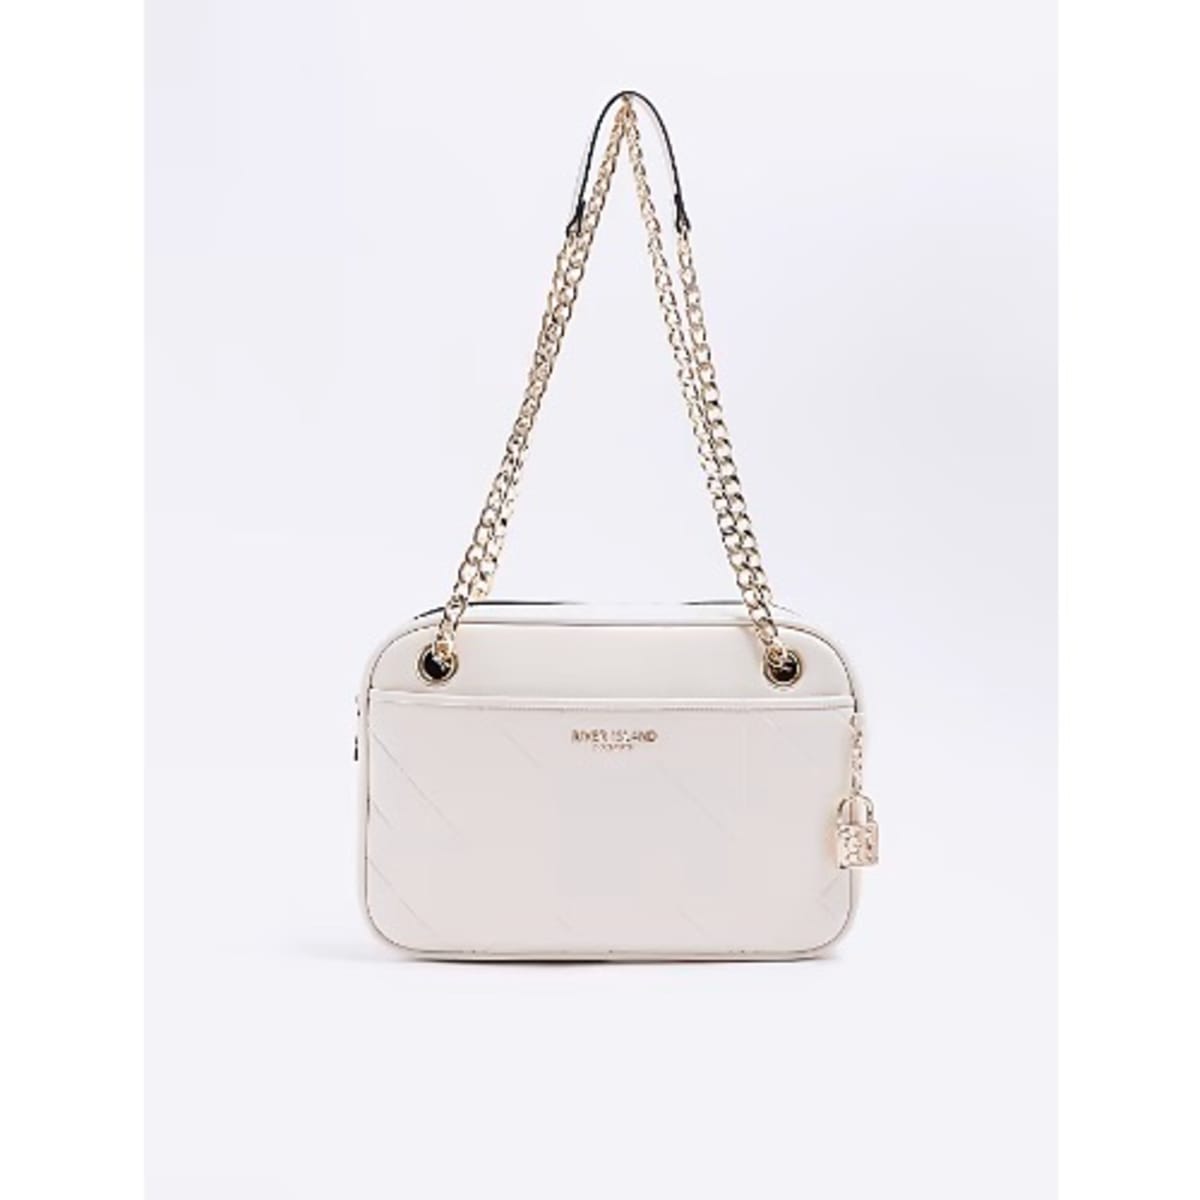 River Island quilted double cross body bag in cream